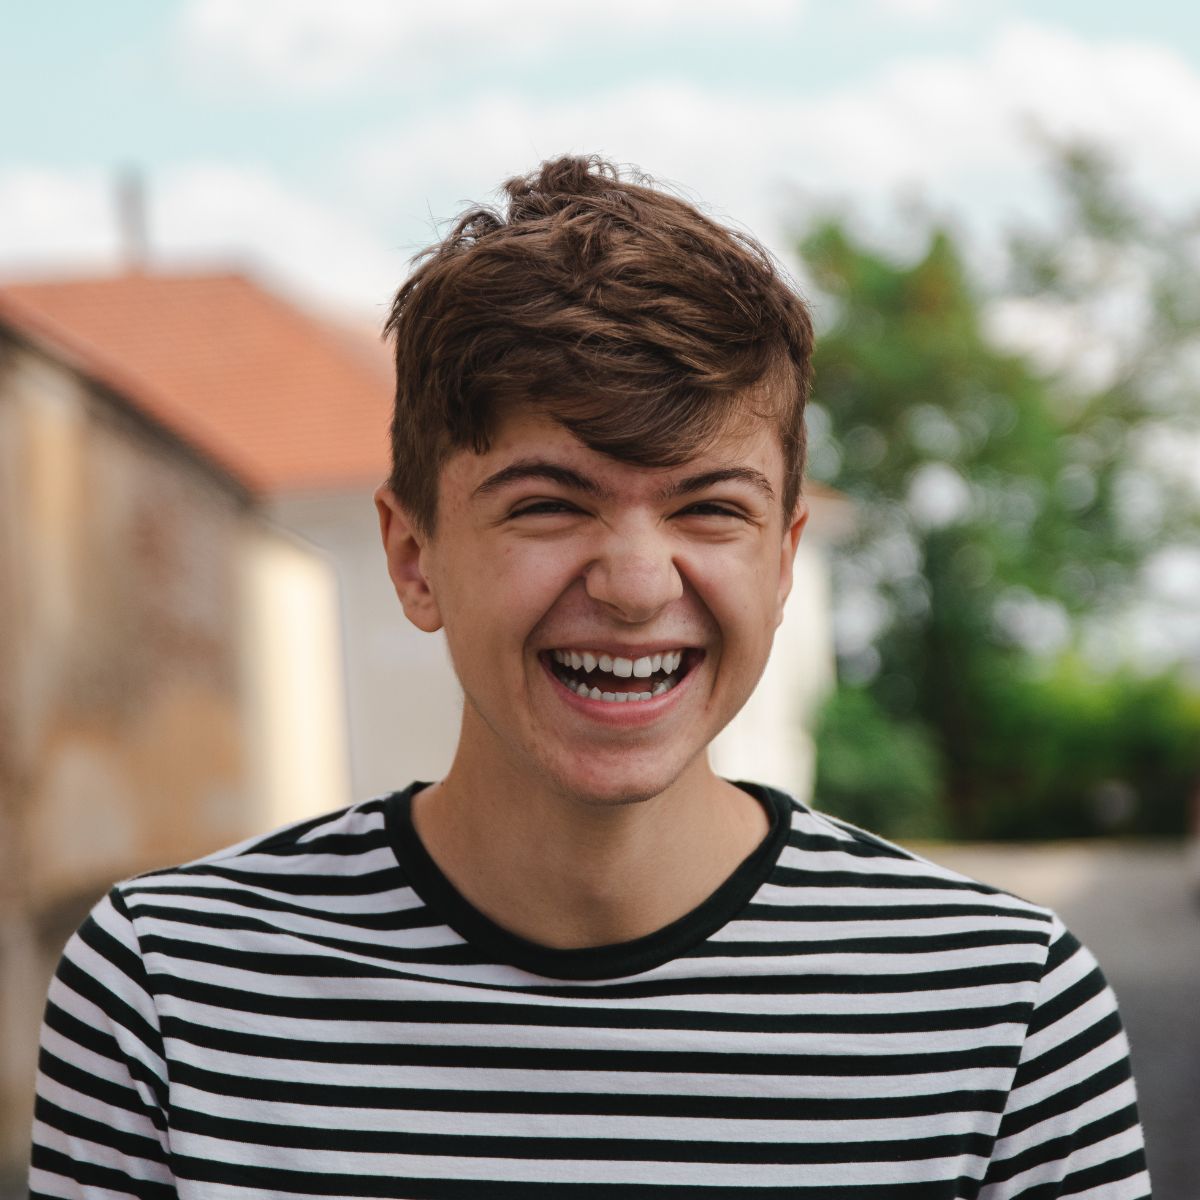 Adolescent boy wearing a black and white striped t-shirt laughing